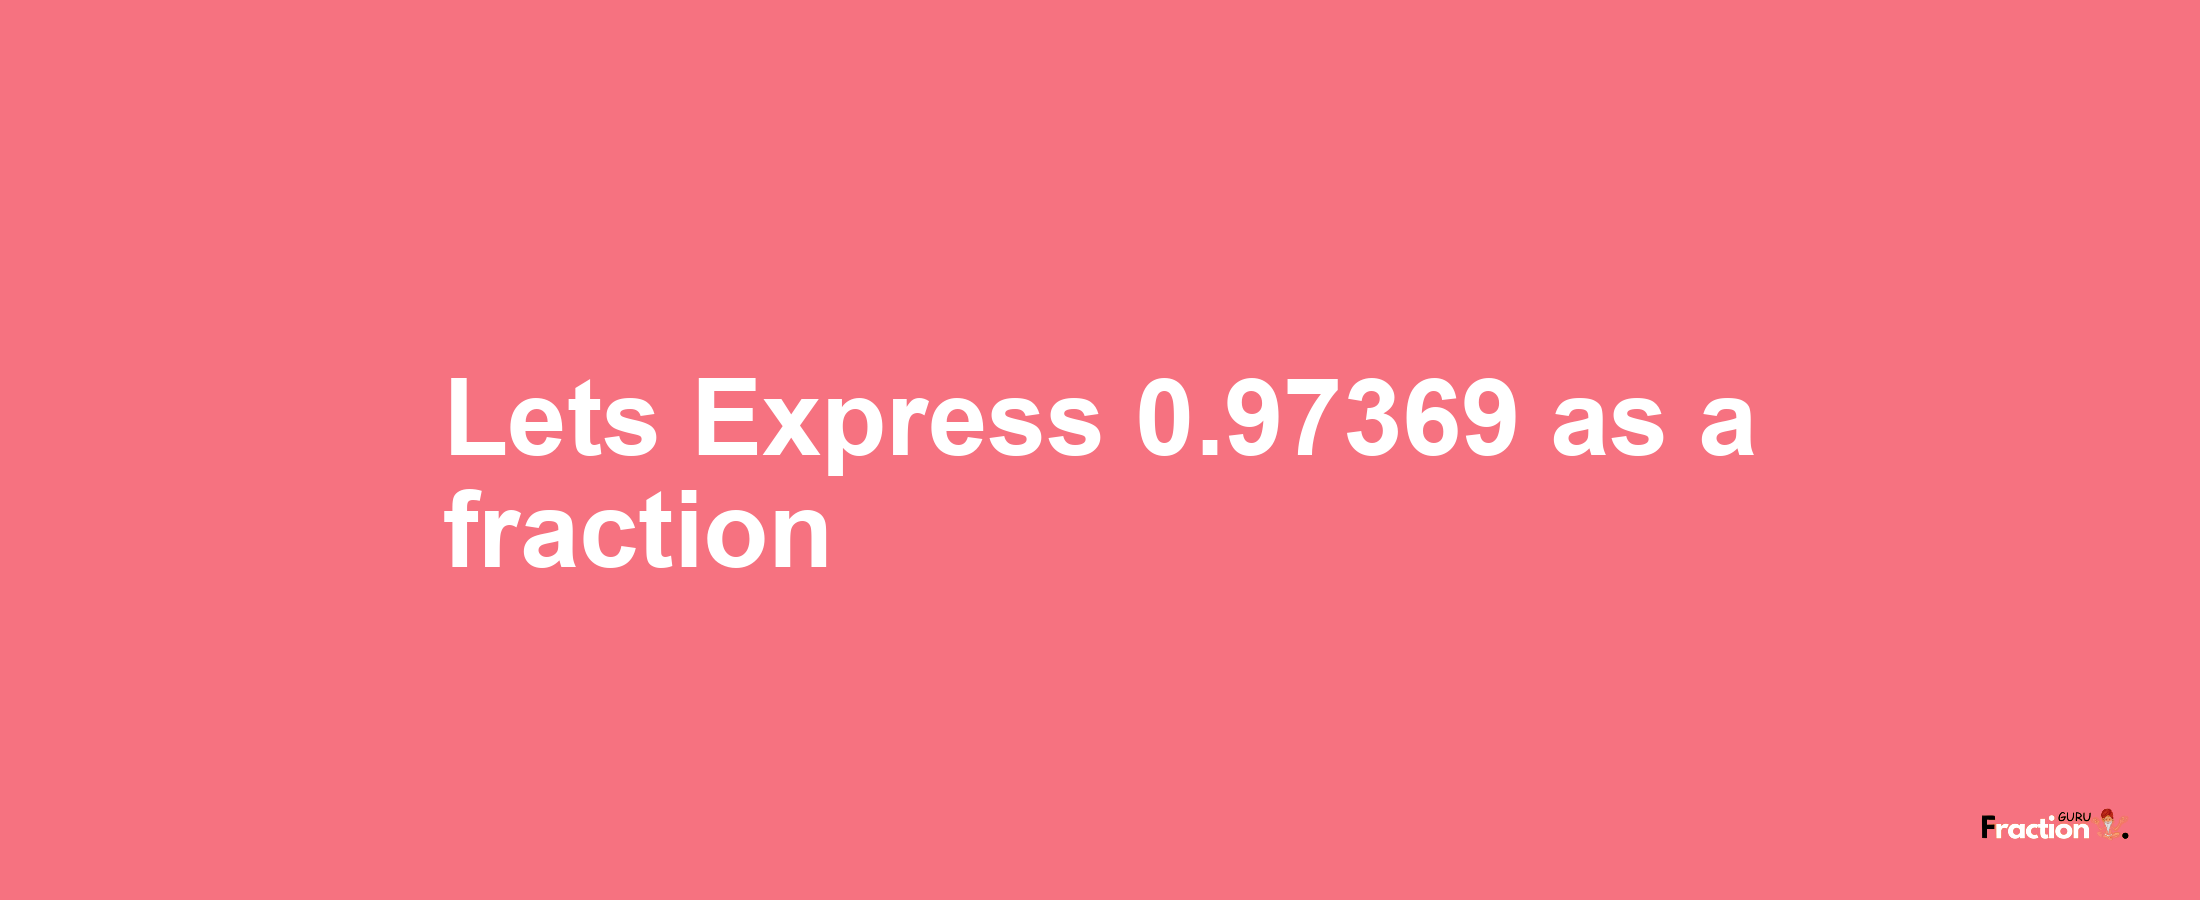 Lets Express 0.97369 as afraction